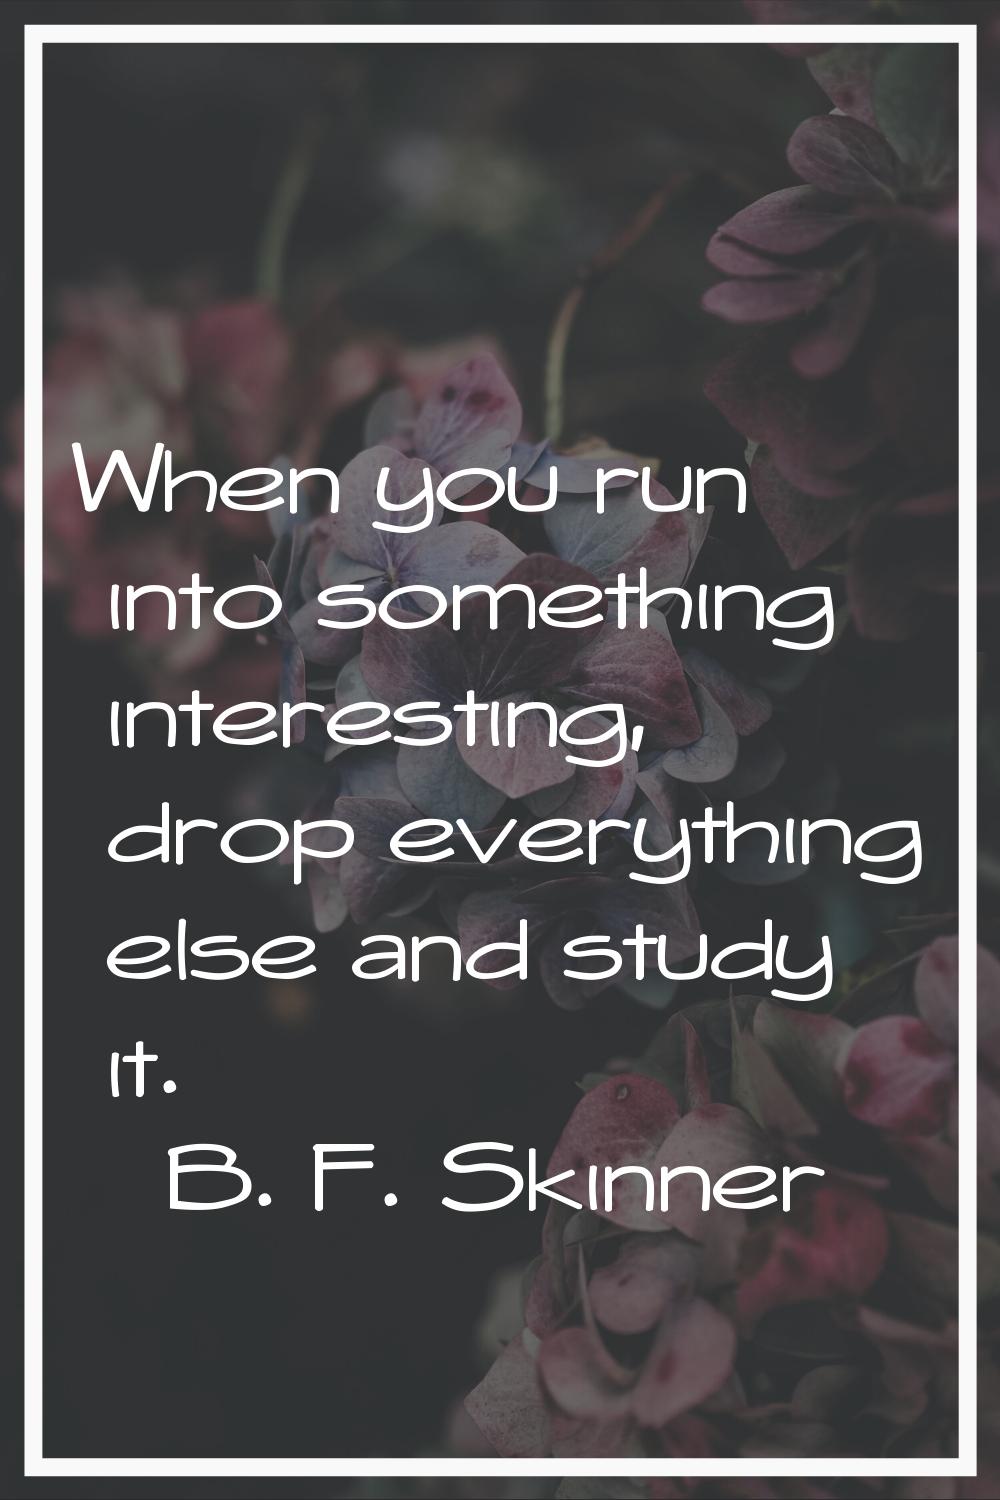 When you run into something interesting, drop everything else and study it.